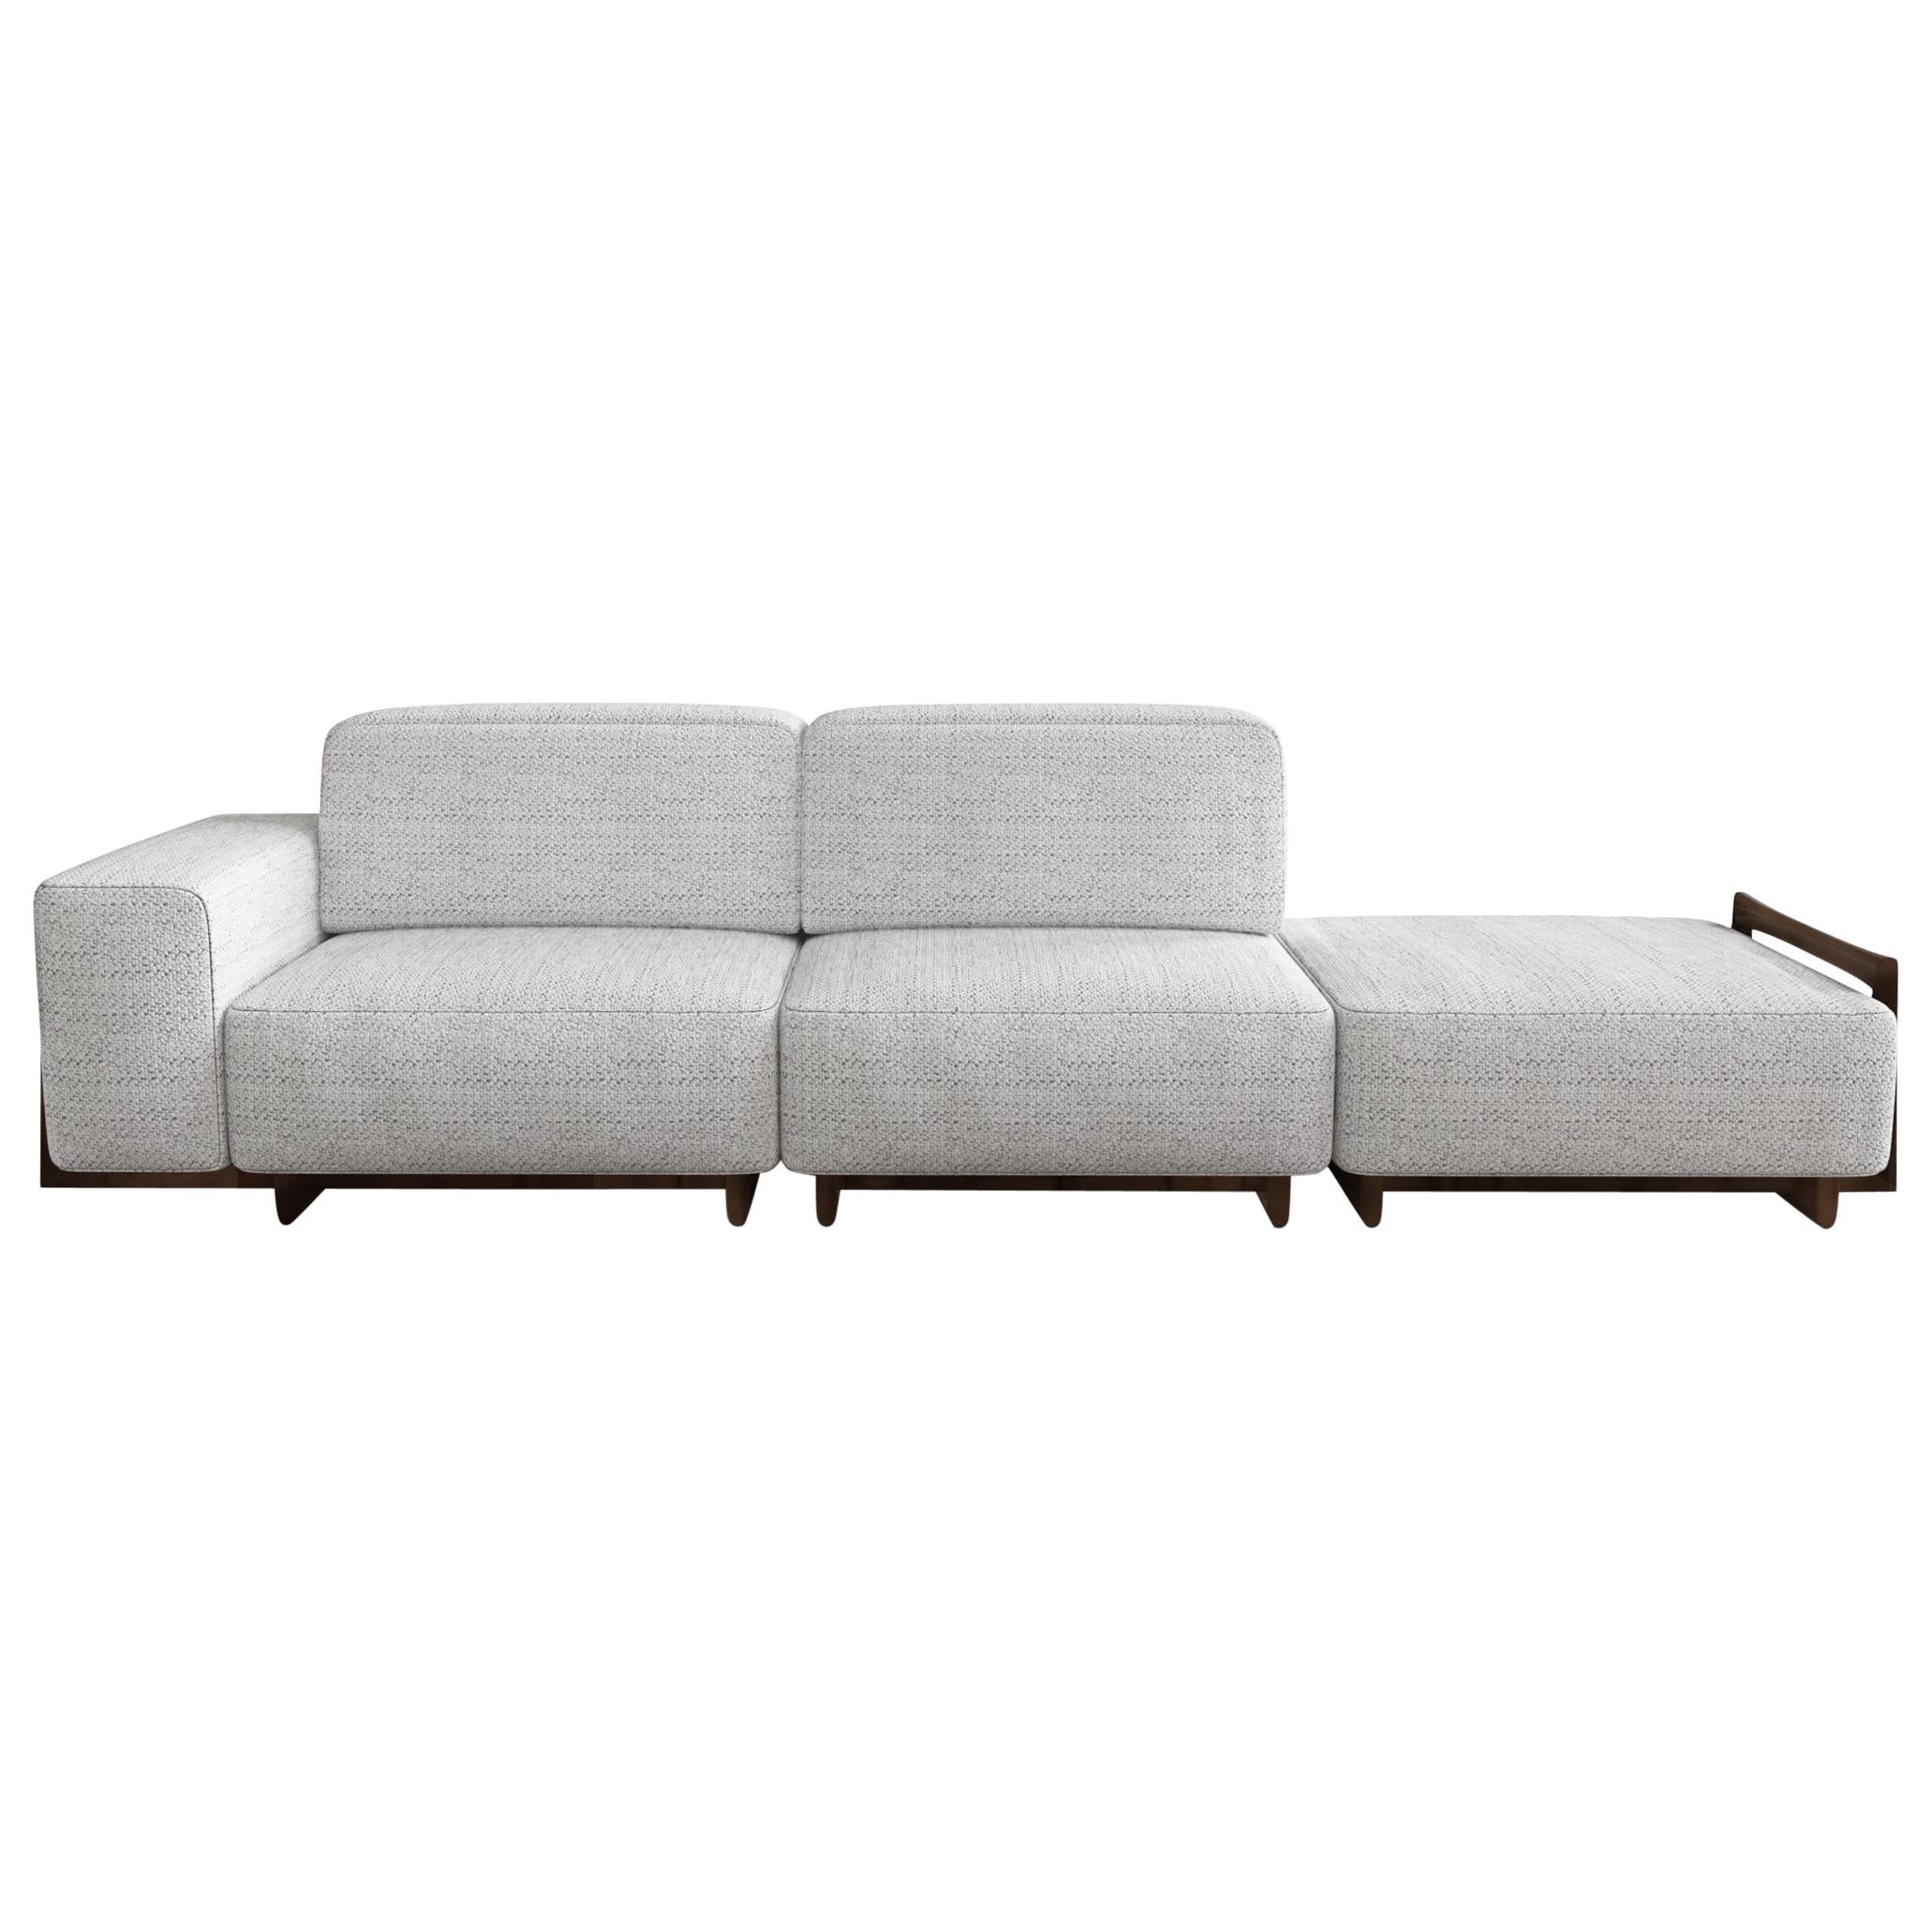 Minimal Modern Sugar Boucle Fabric Modular Sofa by Caffe Latte, a subtle modular sofa with a minimal and modern appeal. With an incredible comfortable shape both in the upholstery and back, the Sugar Modular Sofa is made with boucle and ash with